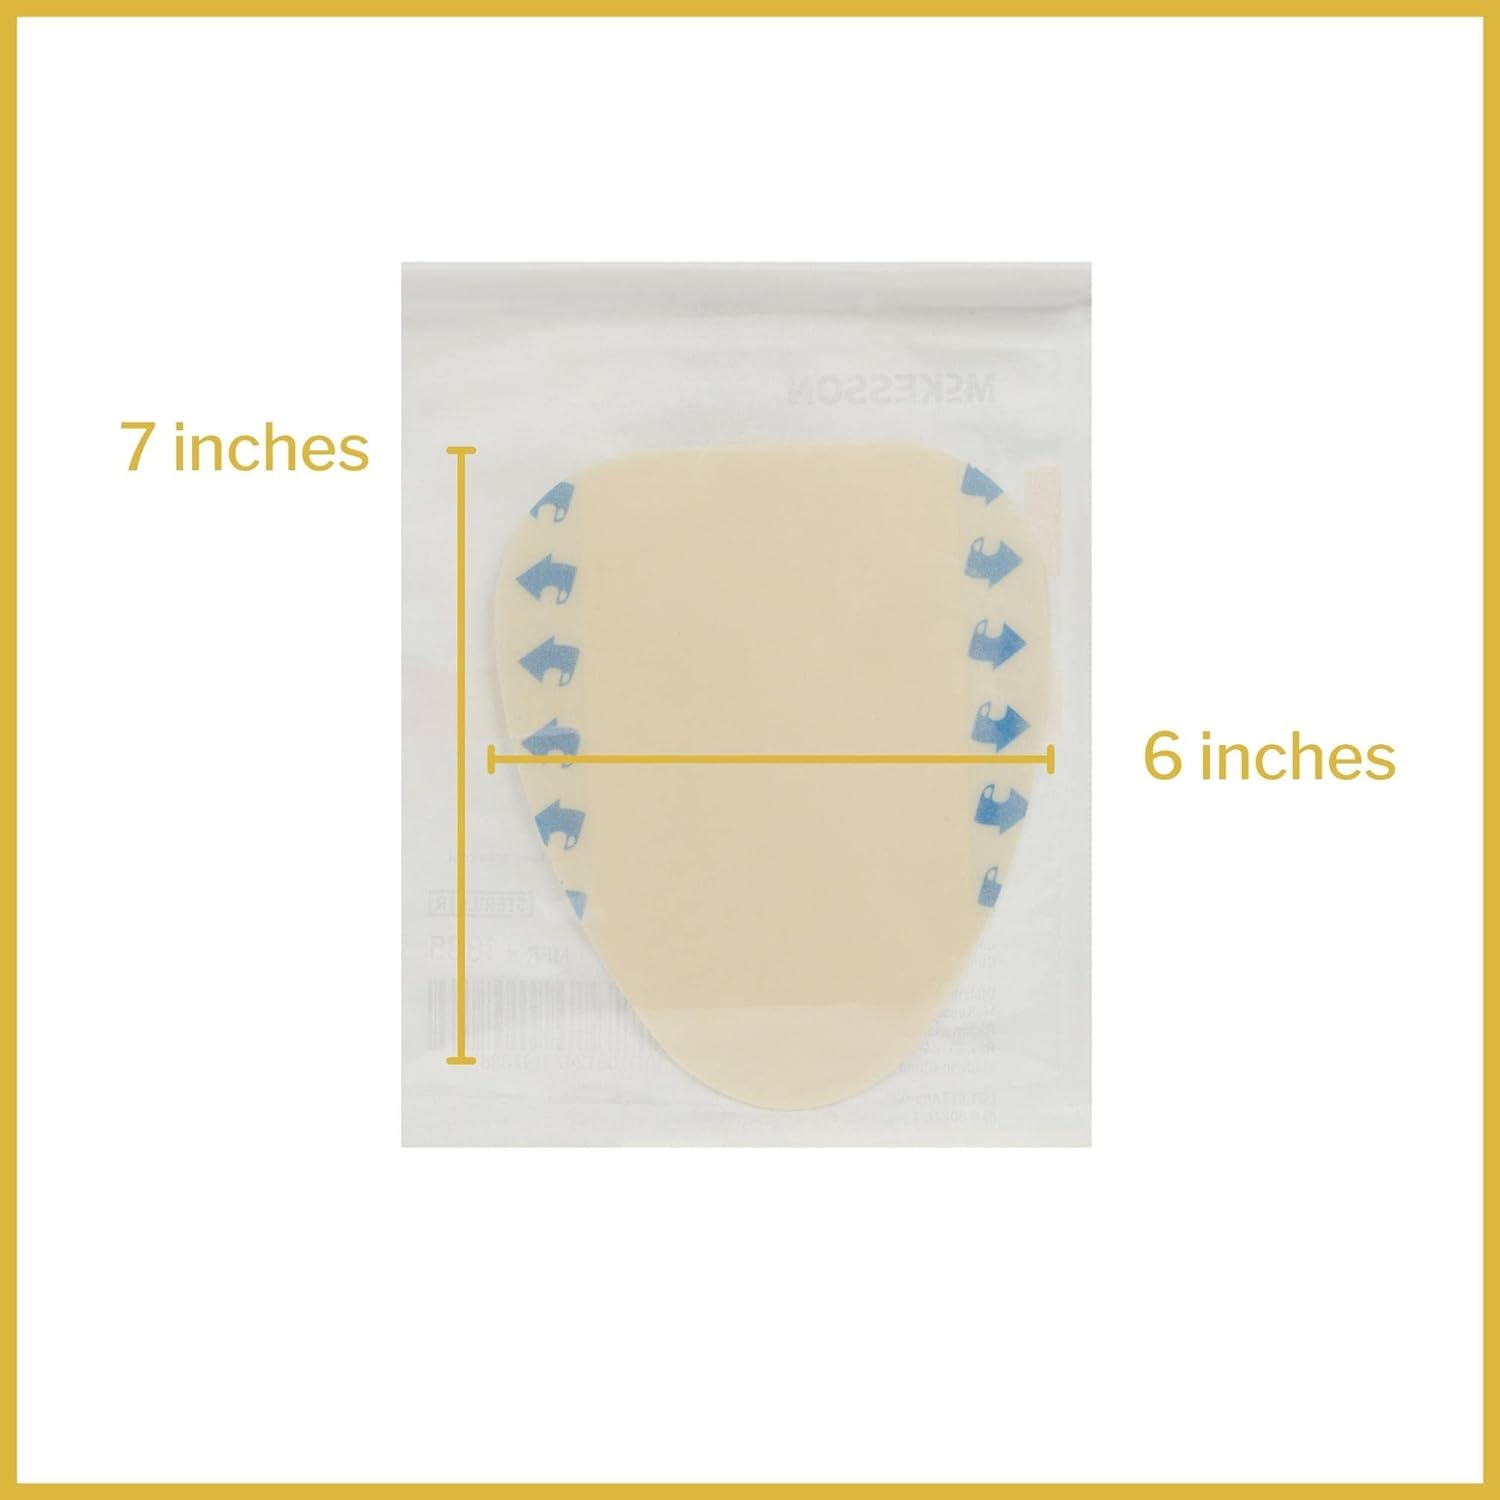 McKesson Hydrocolloid Dressing, Sterile, Sacral, Thin, 6 in x 7 in, 10 Count, 1 Pack